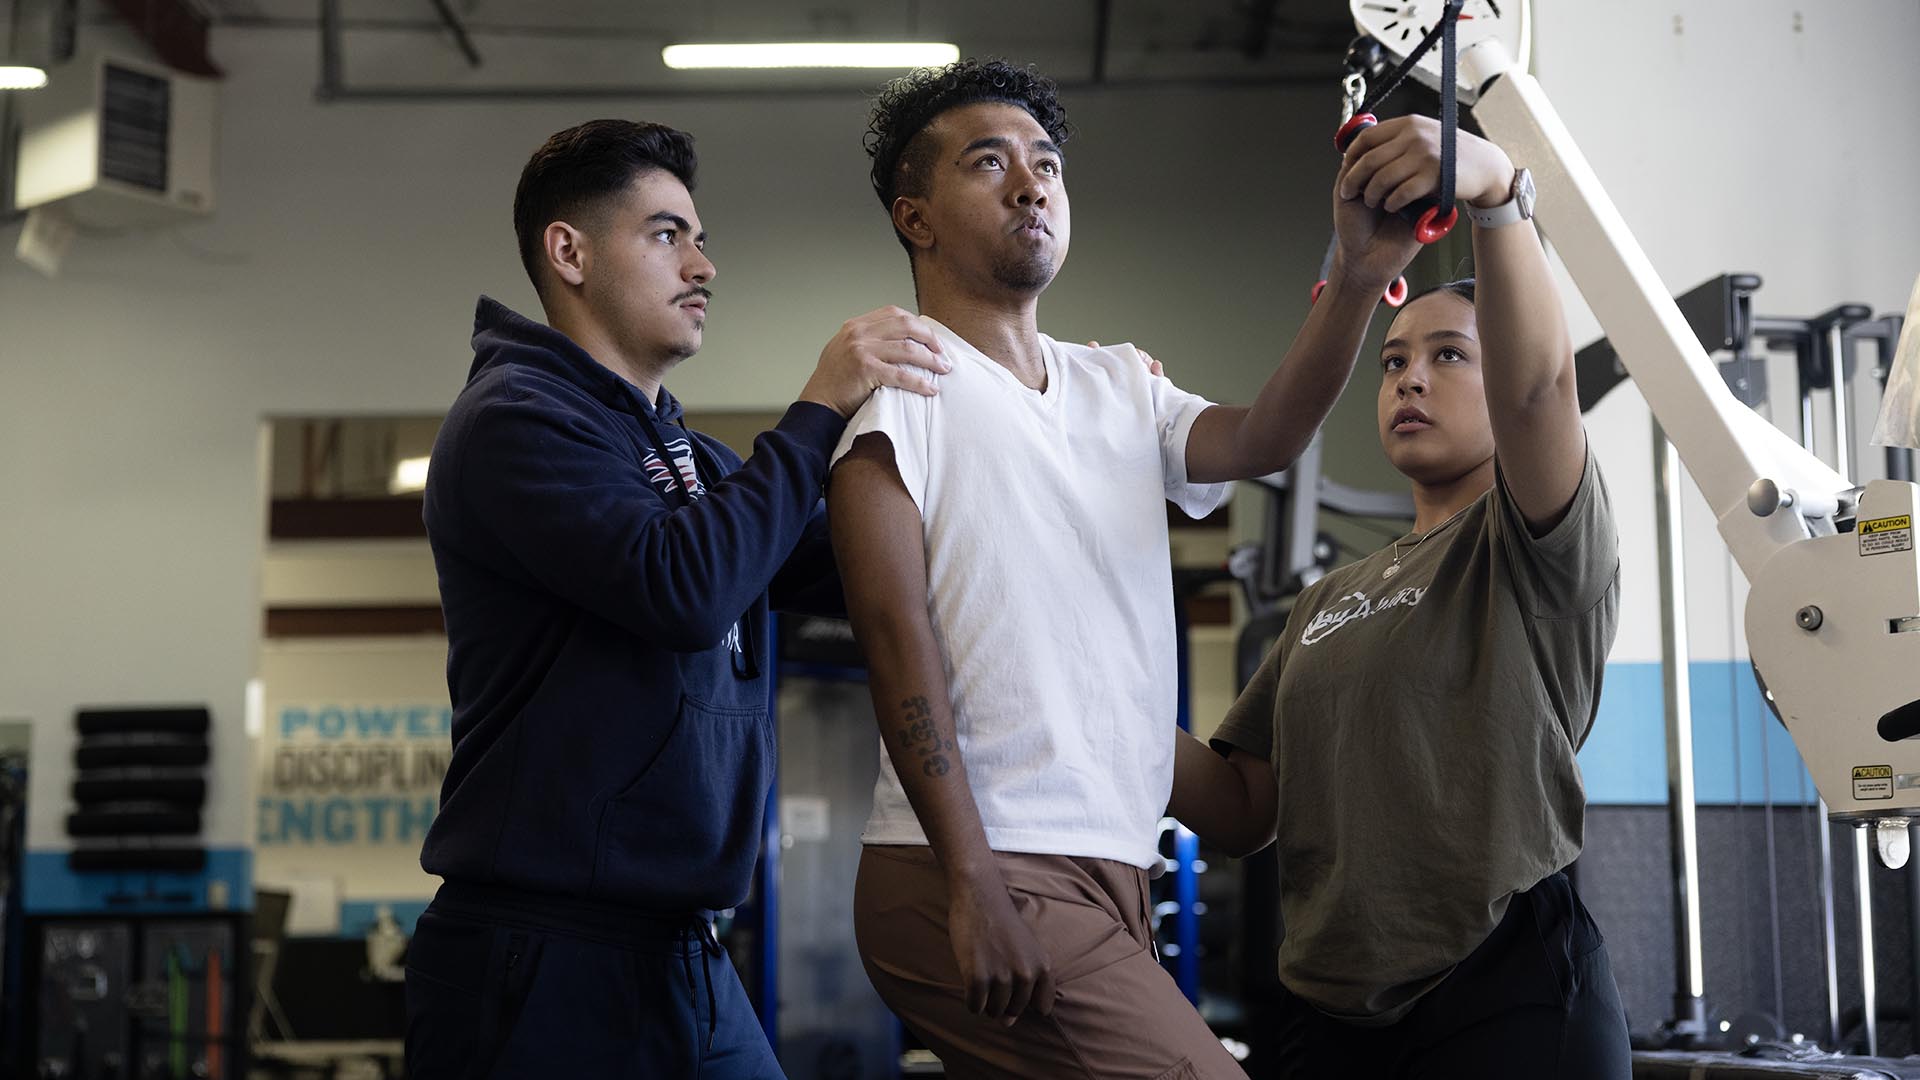 MSU Denver Exercise Science students Humberto Pallares, left, and Aranely Dominguez assist NeuAbility client Tyler Wesley with his exercises